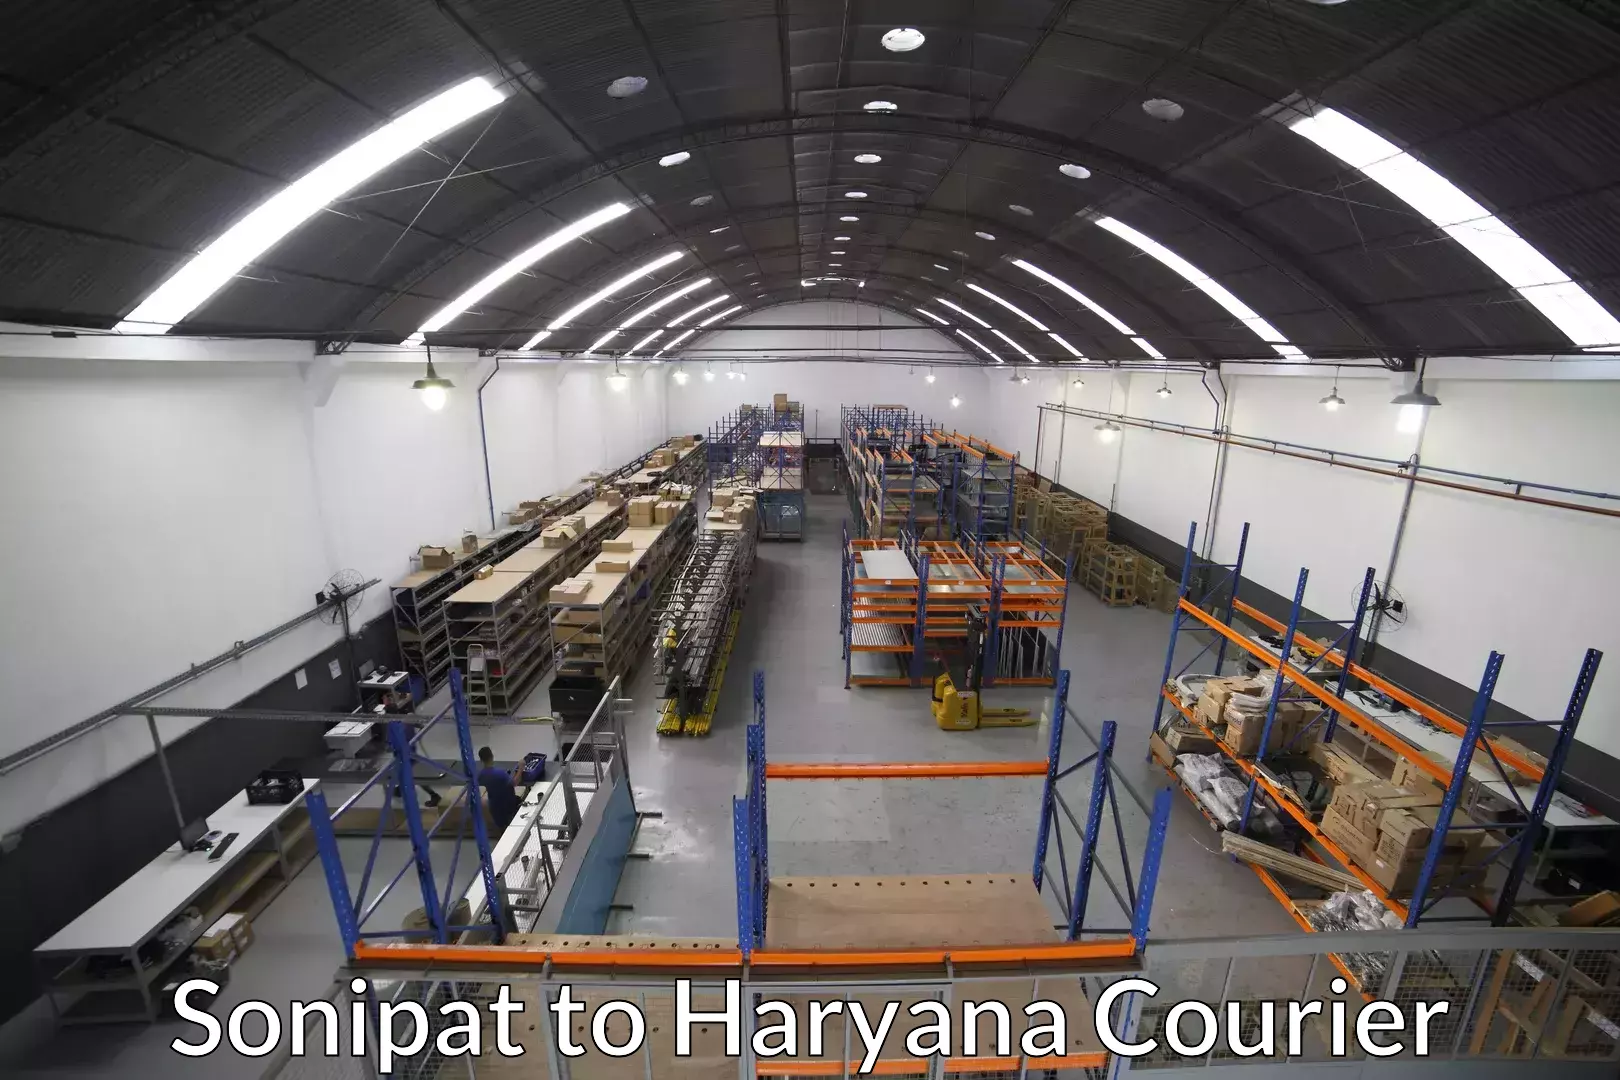 Furniture delivery service Sonipat to Haryana